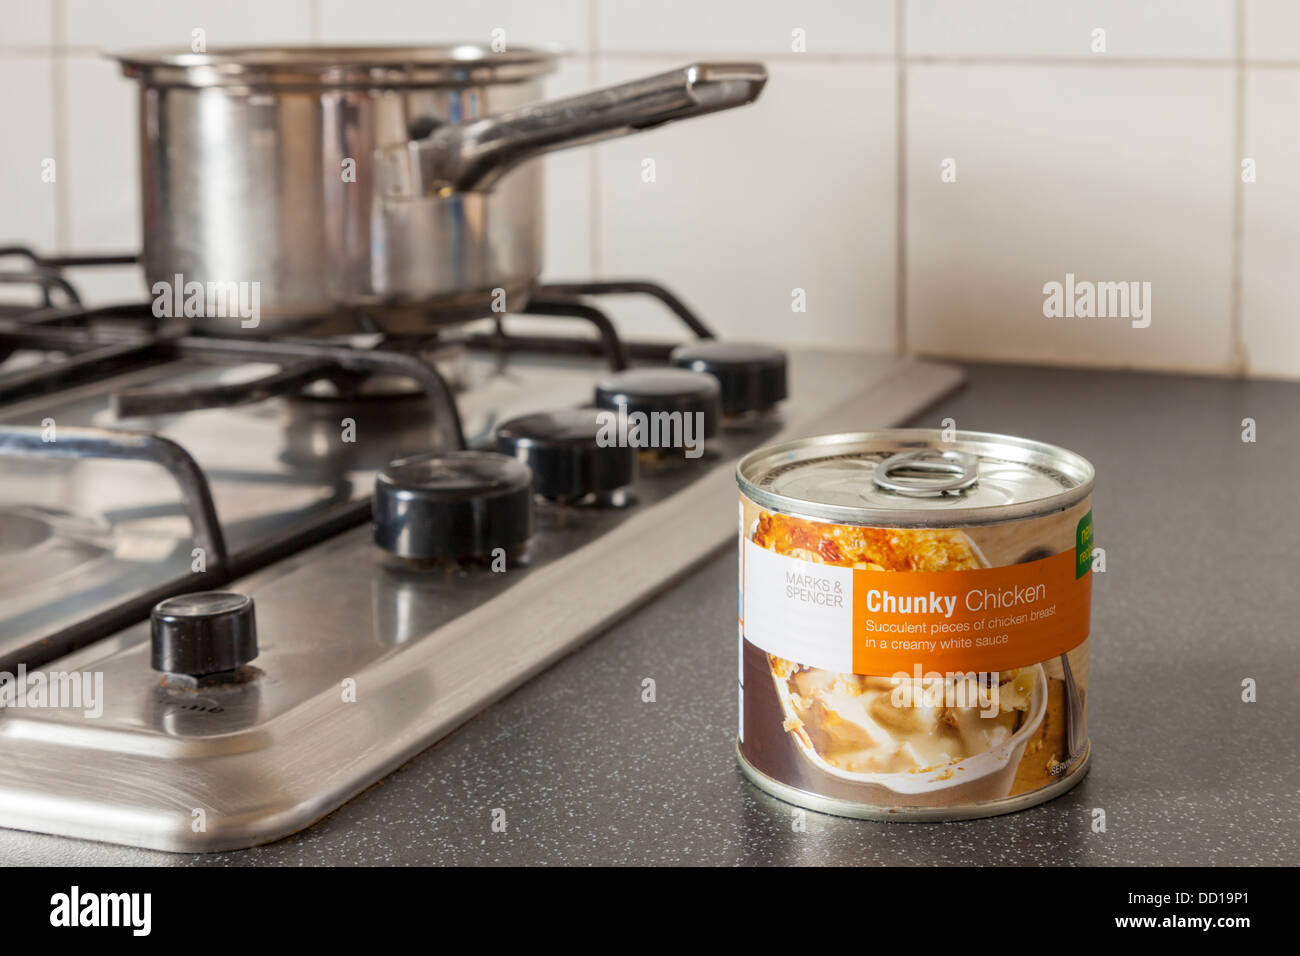 Own brand canned food. Marks & Spencer Chunky Chicken pieces in a can. Stock Photo